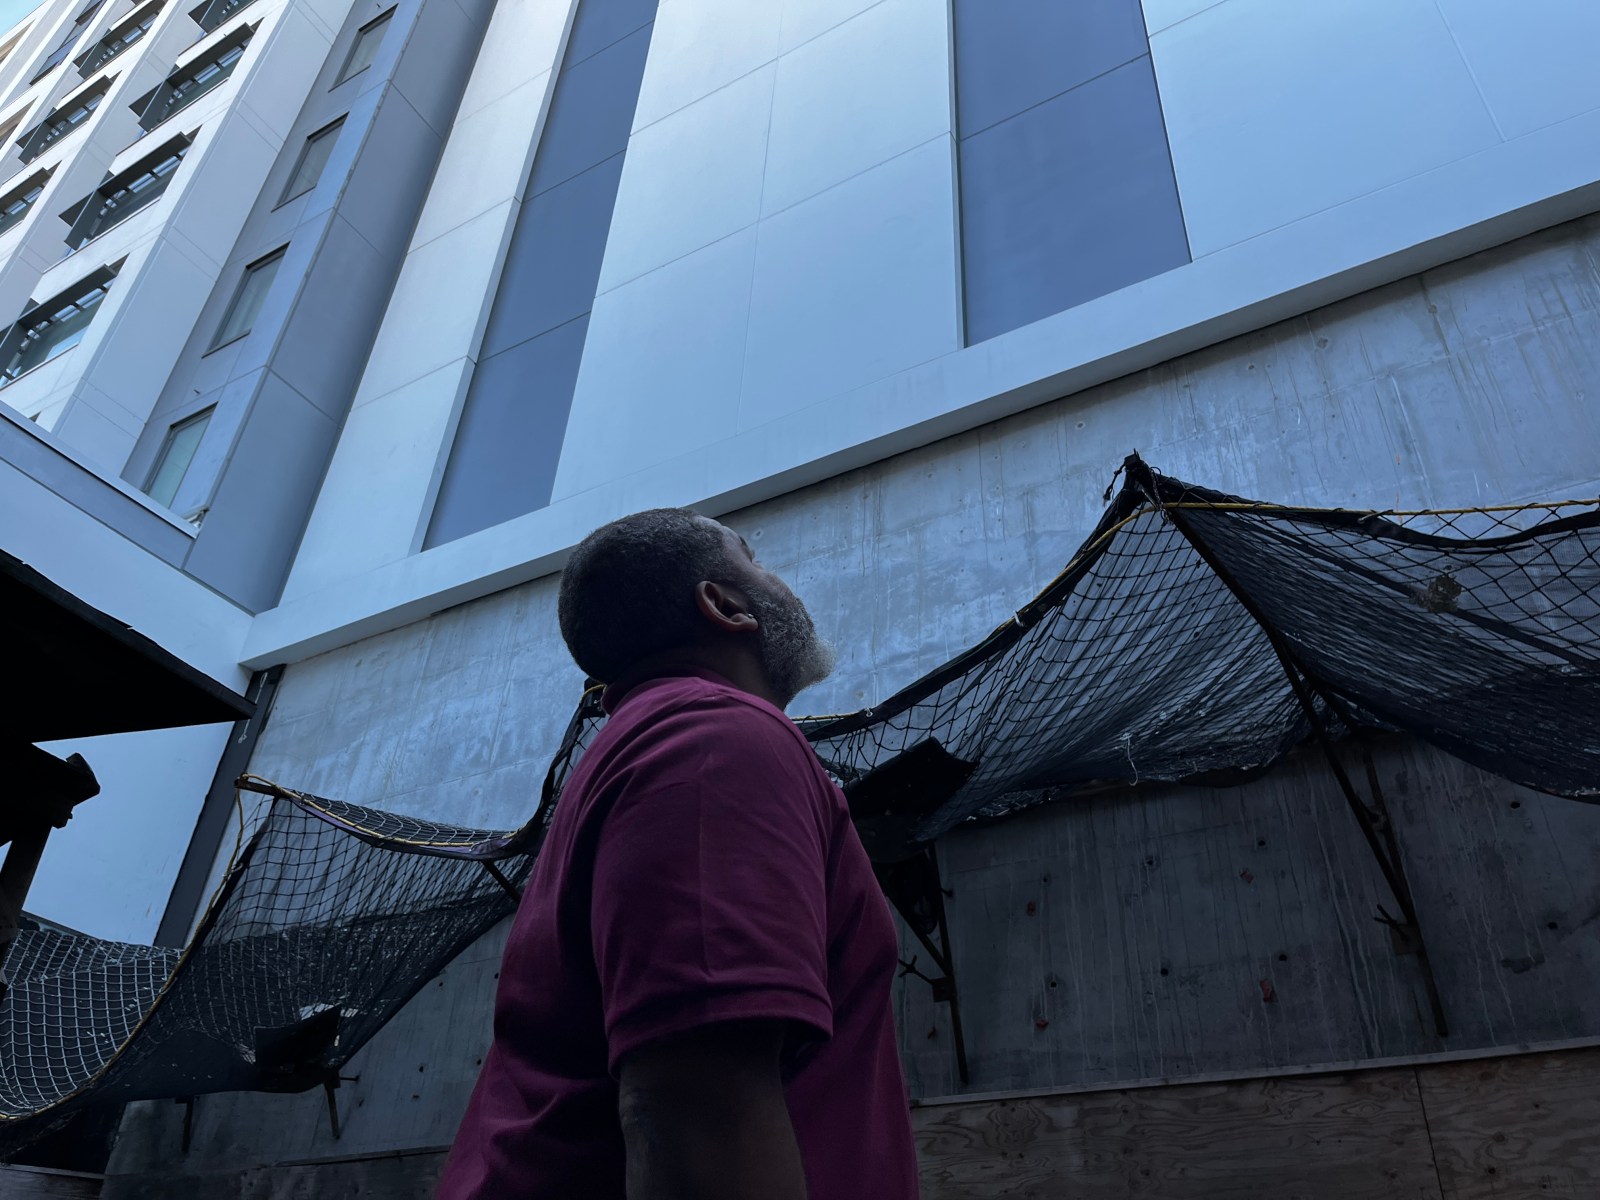 A man in a red shirt stares up at a towering gray building. Beneath the windows of the tower are a series of crude nets that contain some construction debris.